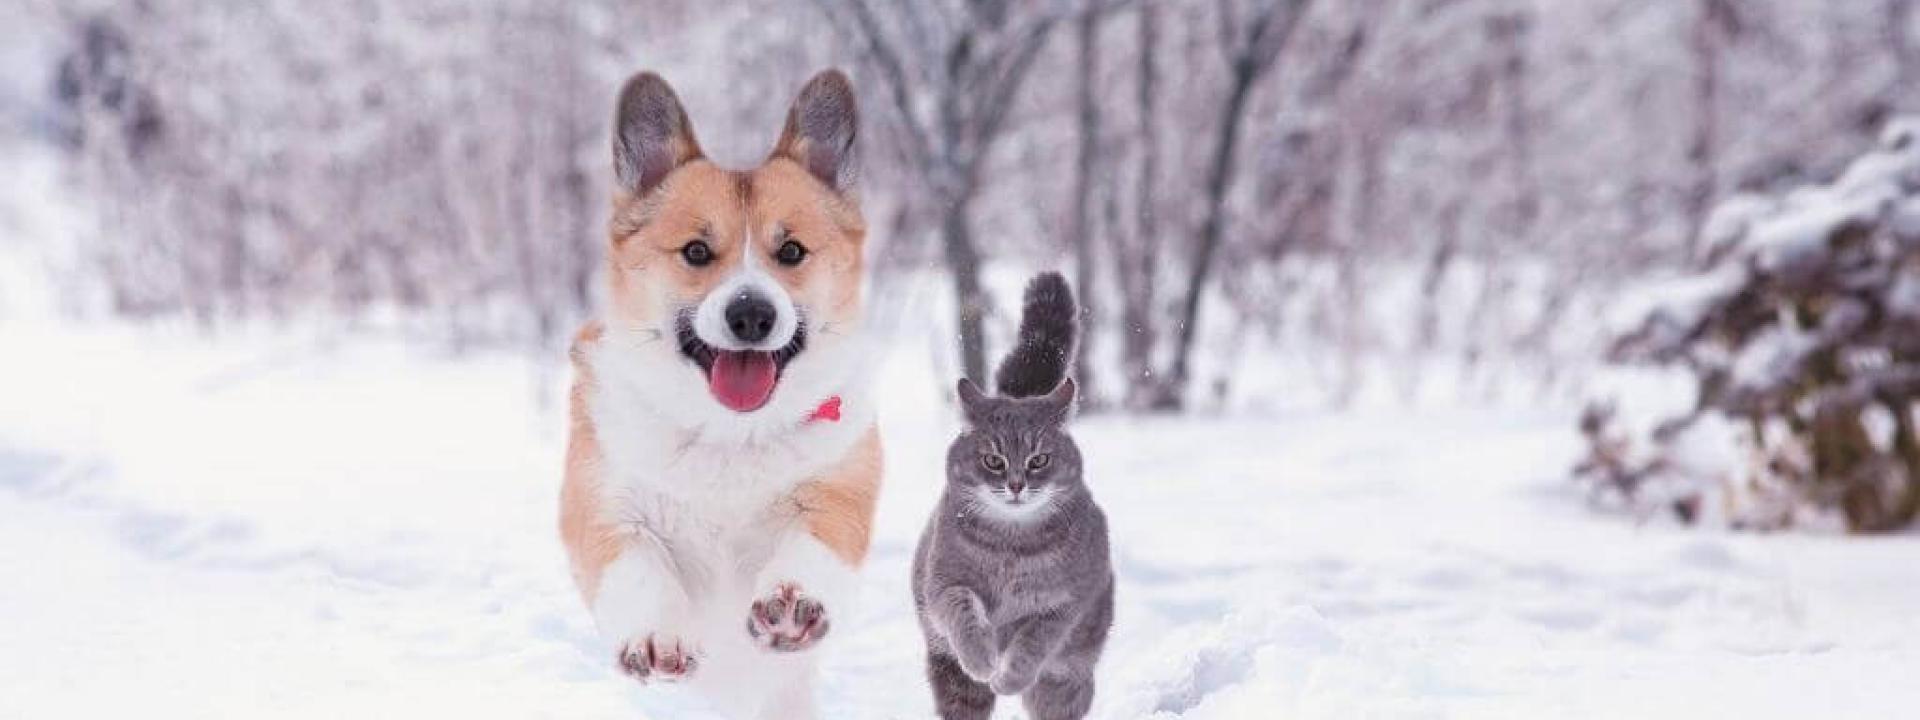 winter activities for cats and dogs